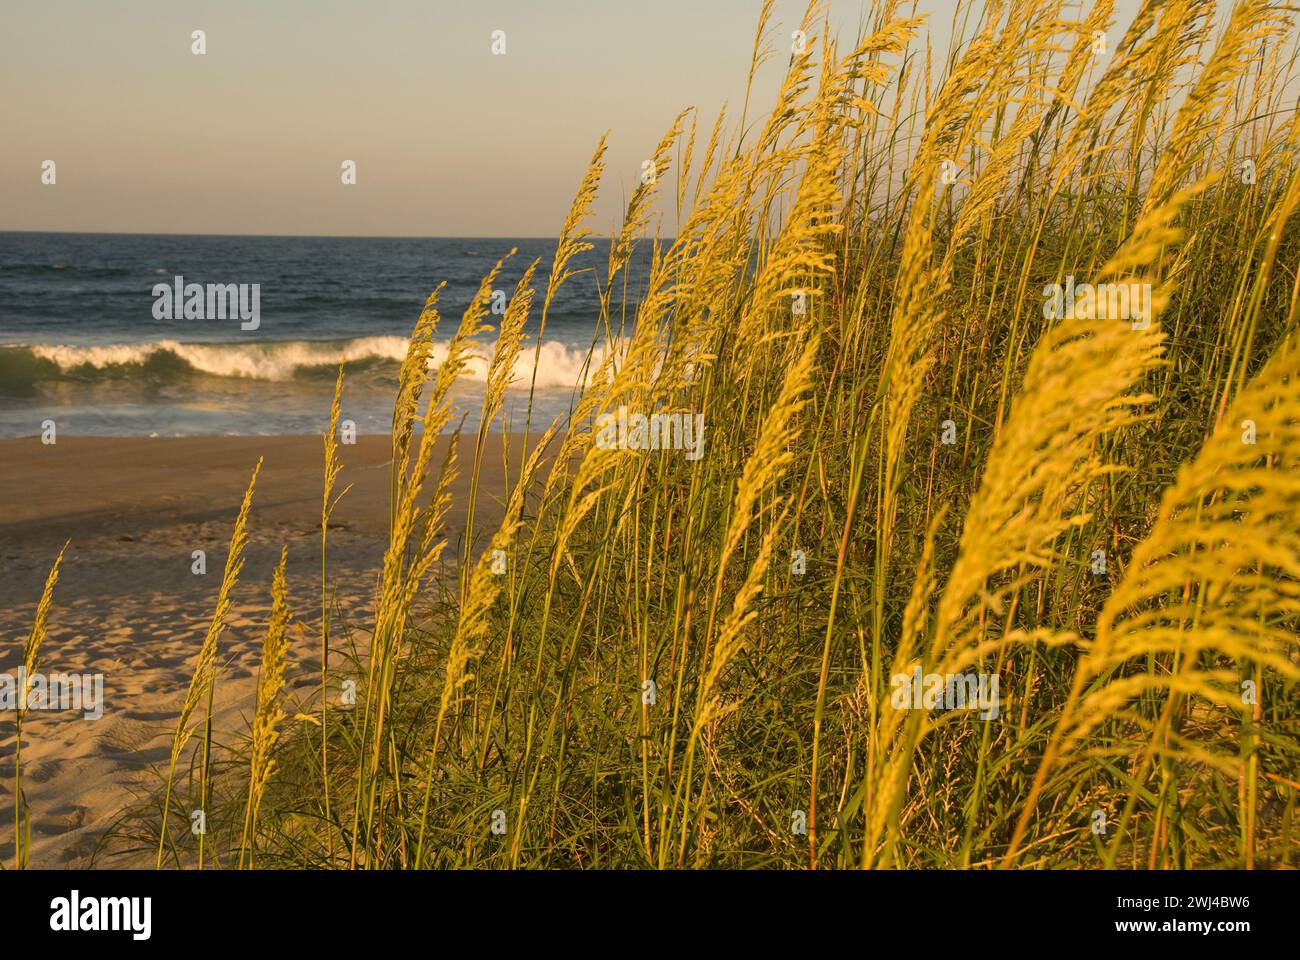 sea oats and grasses grow on sand dunes of the Outer Banks seacoast of North Carolina Stock Photo